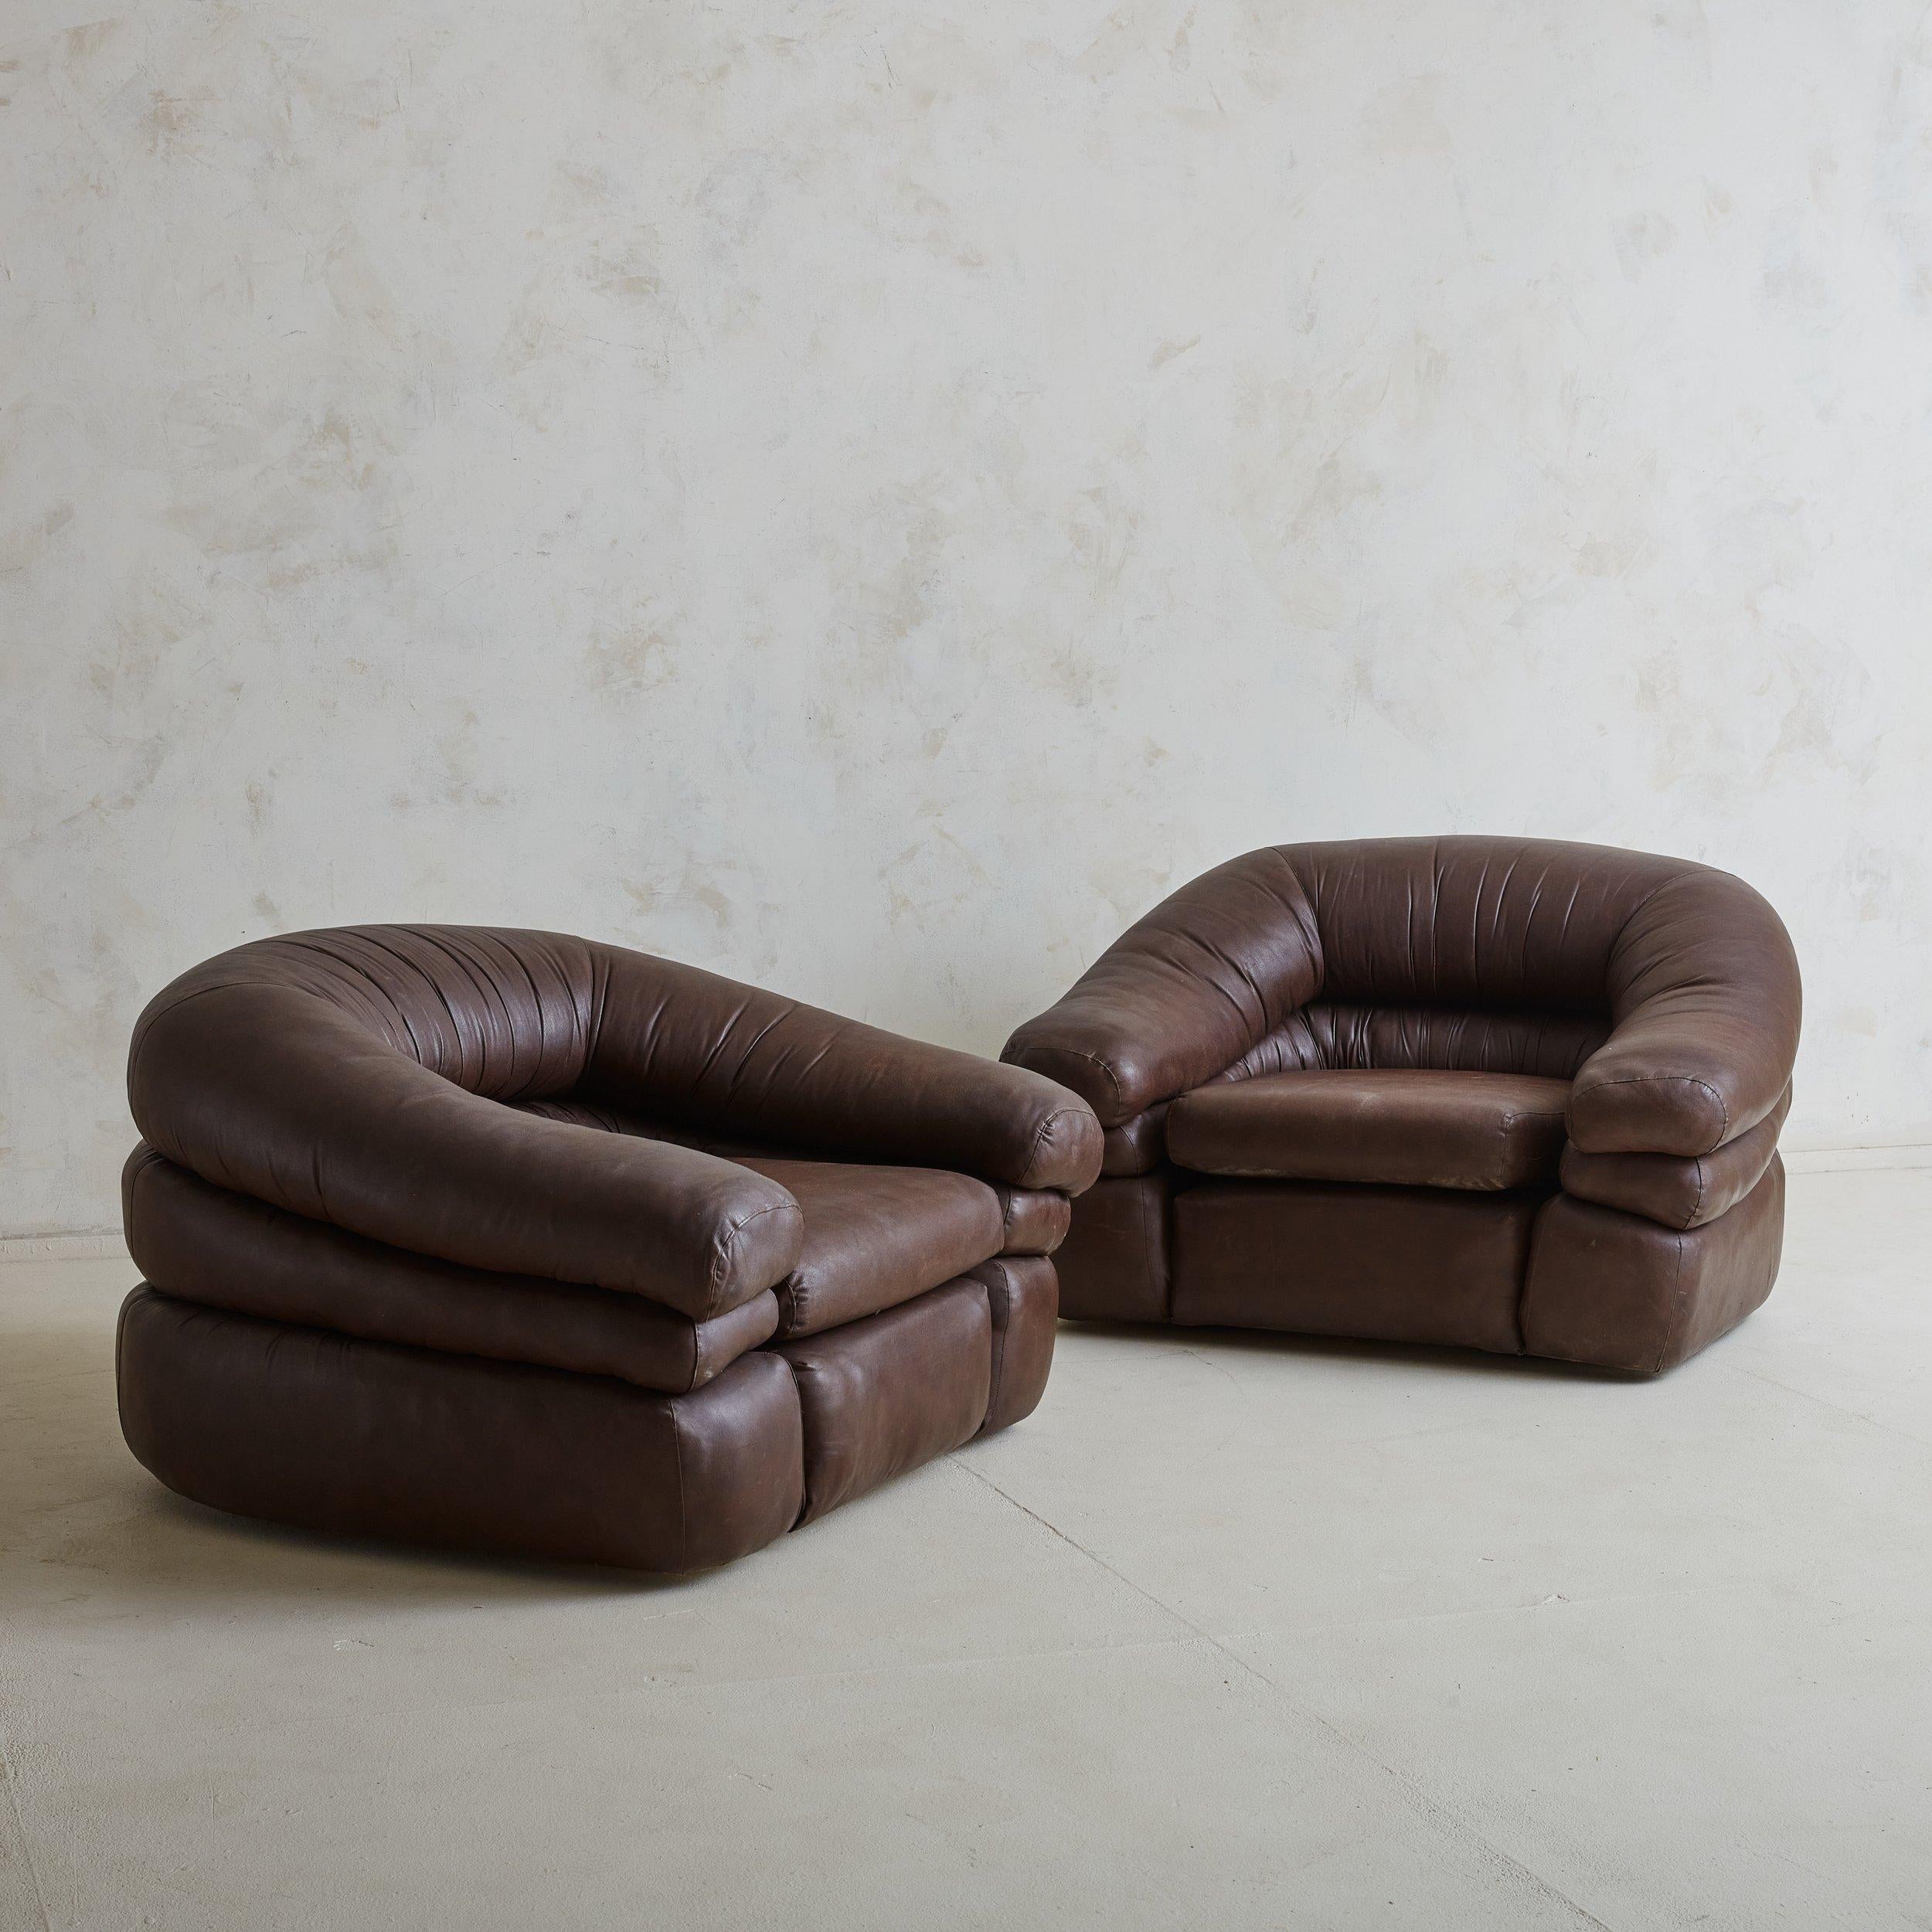 A pair of rare Italian patinated leather lounge chairs designed by Gionathan de Pas, Donato D’Urbino, and Paolo Lomazzi in the 1960s. These tub-form lounge chairs are entirely molded of foam and covered with original thick, soft leather in a rich